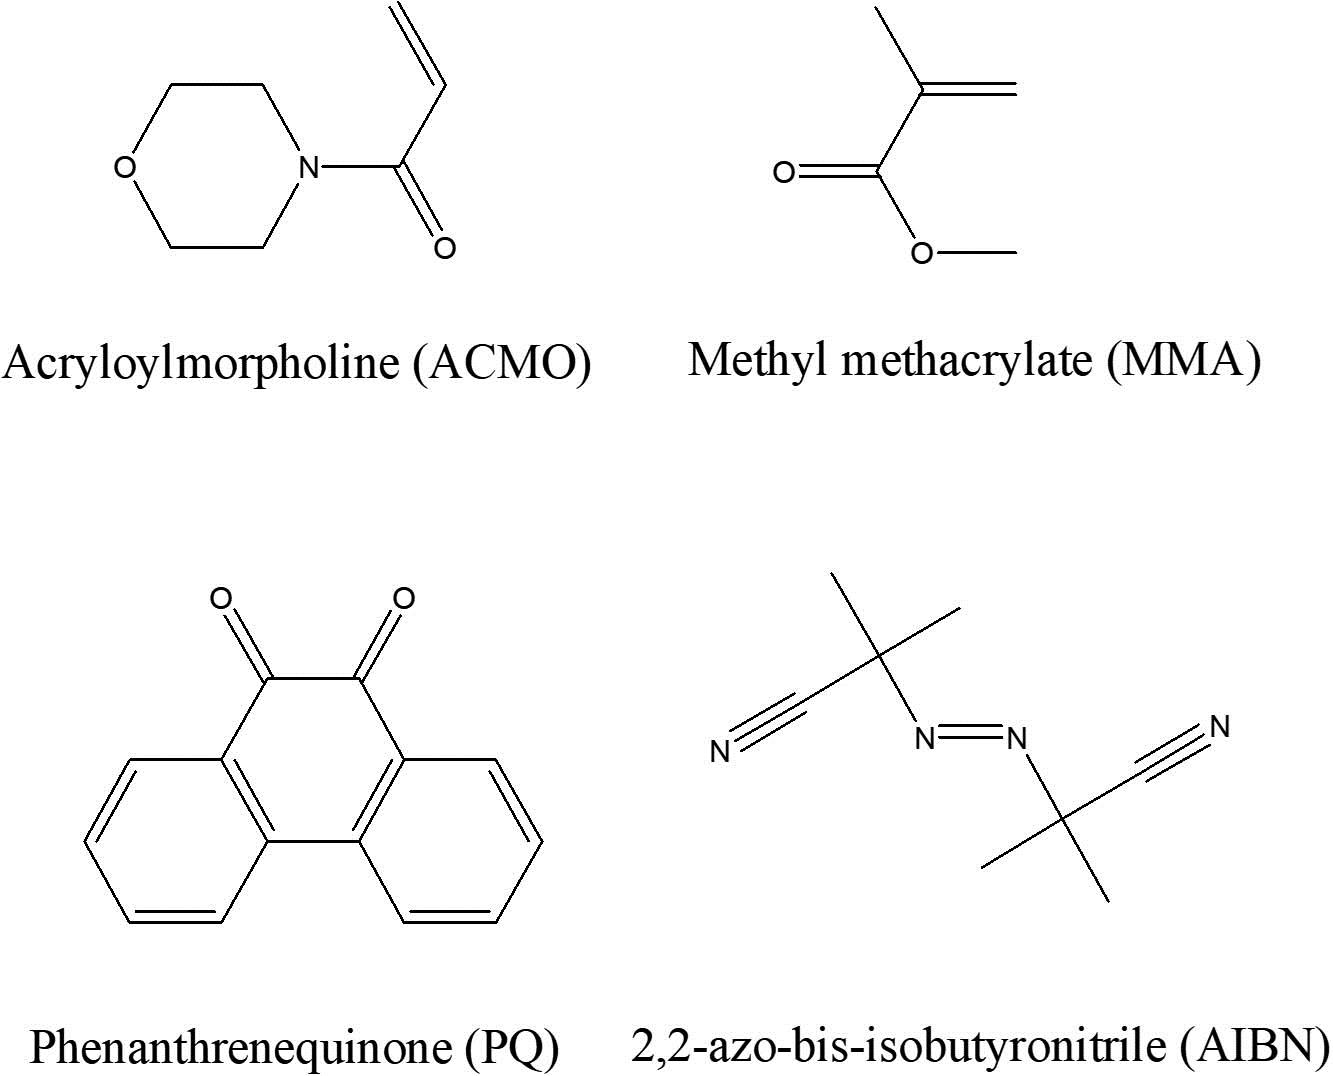 Chemical structures of the components in our photopolymer.